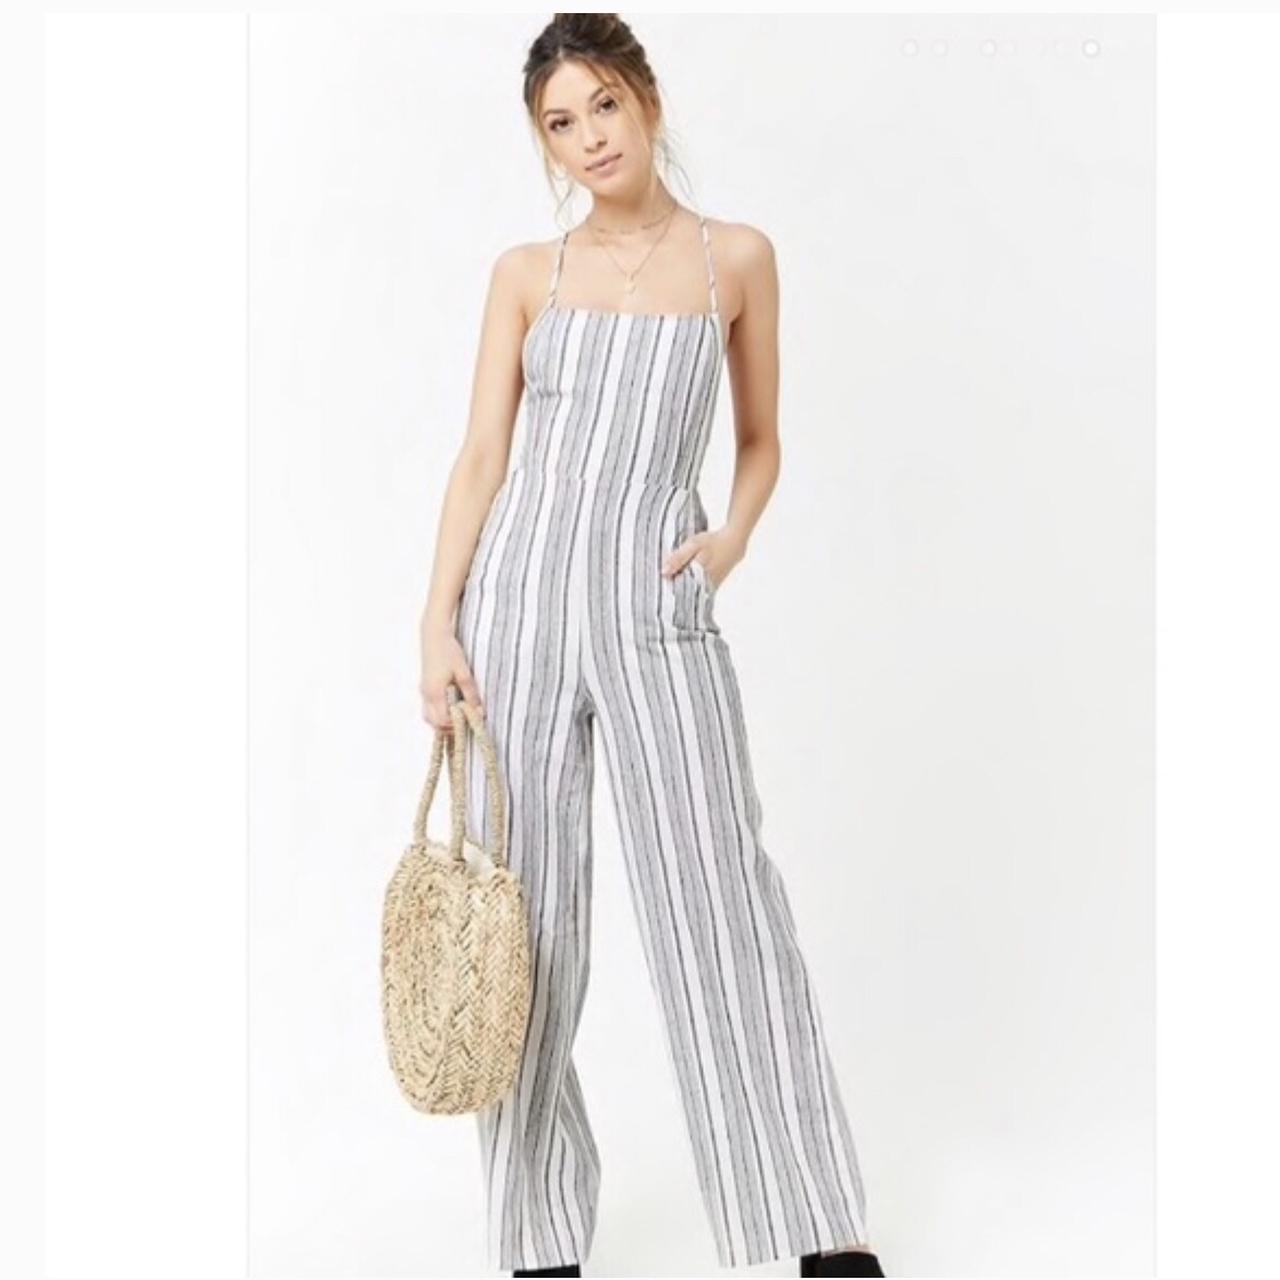 Shop Smocked Tube Jumpsuit for Women from latest collection at Forever 21   336219